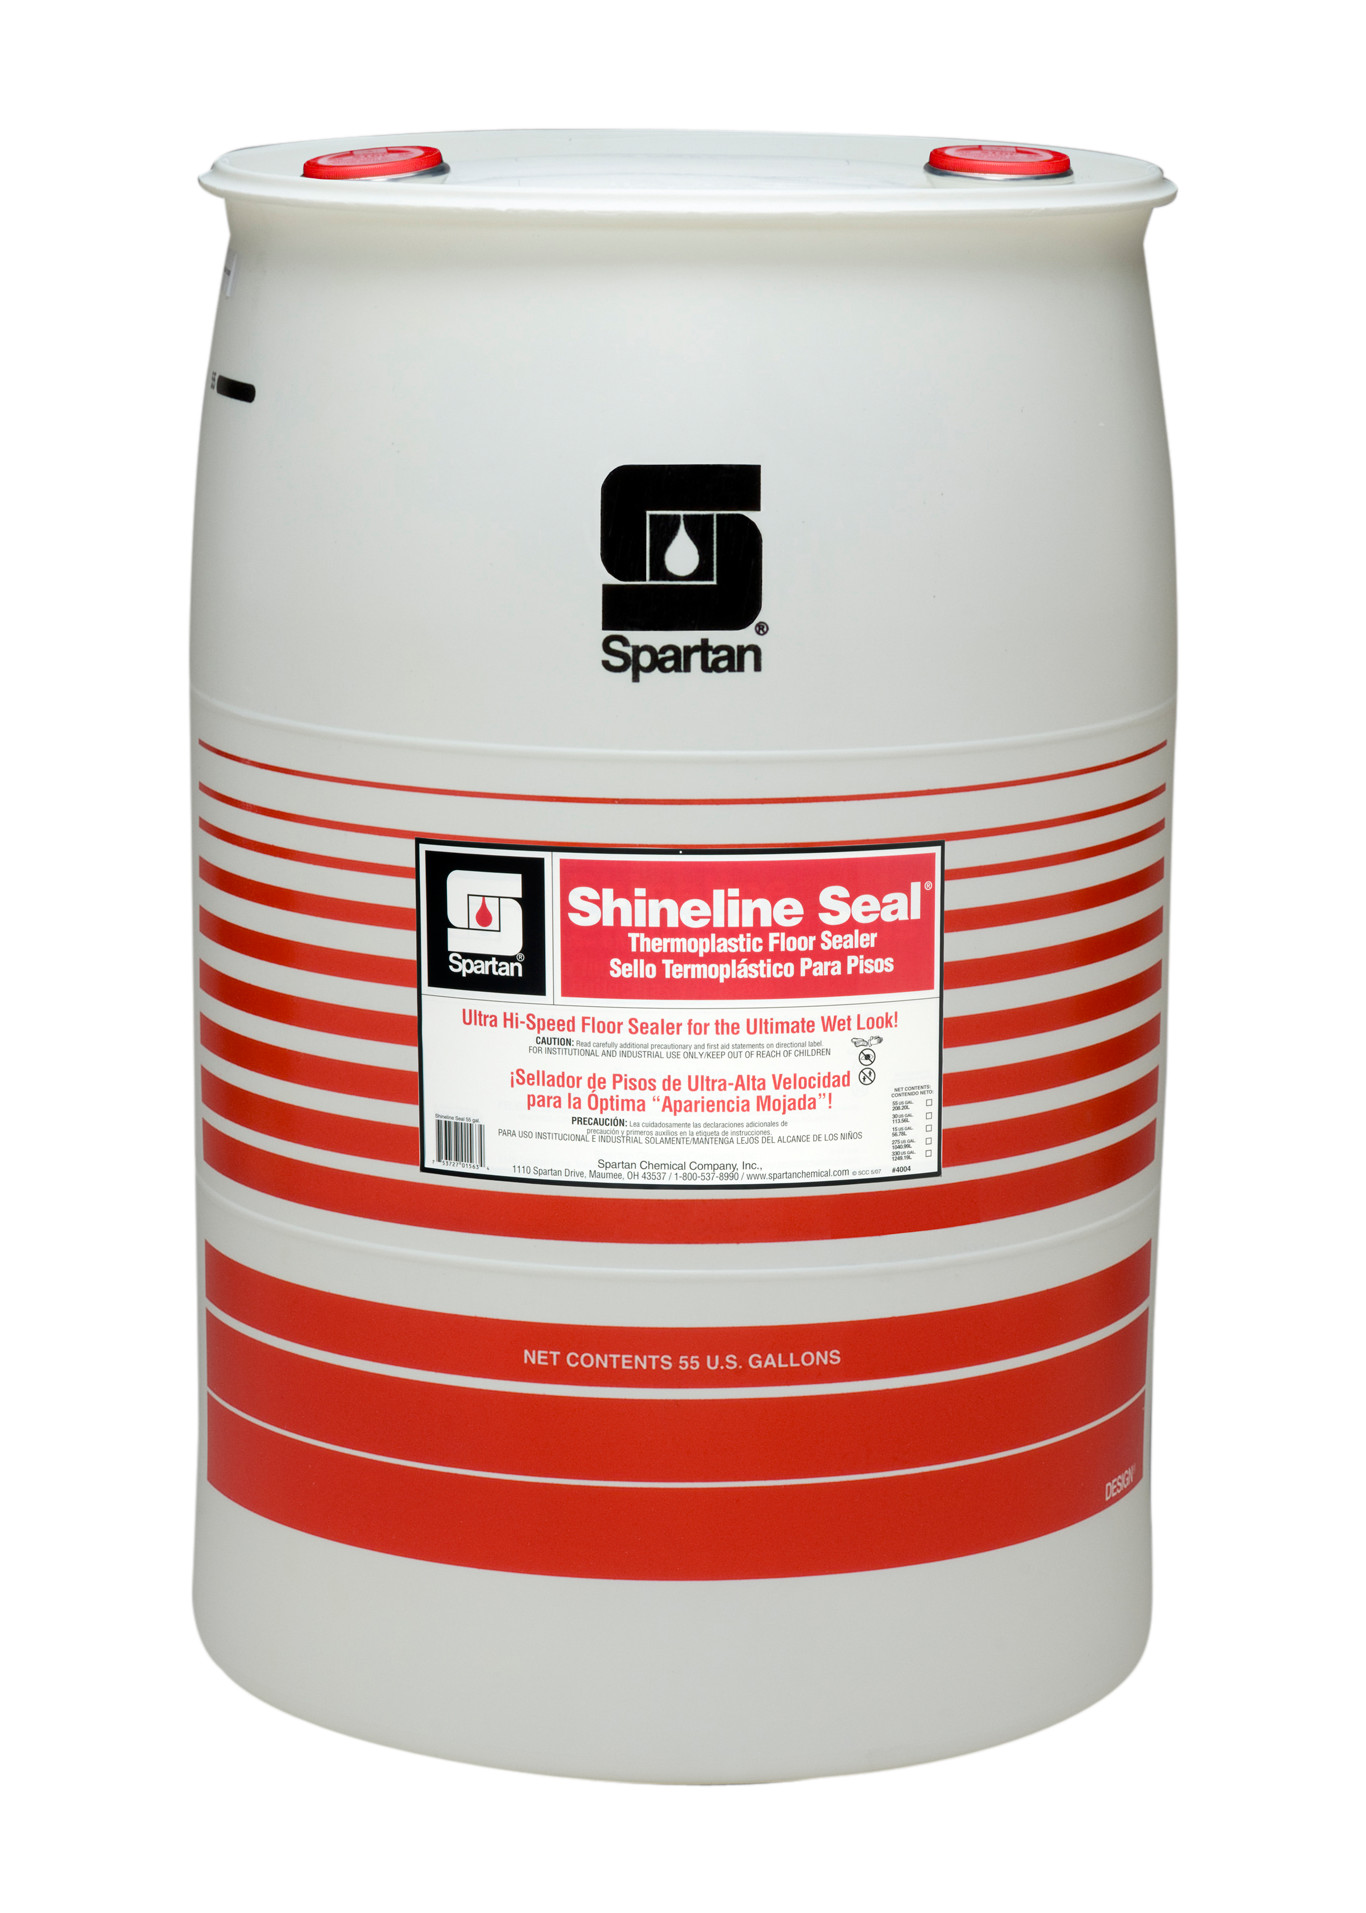 Spartan Chemical Company Shineline Seal, 55 GAL DRUM